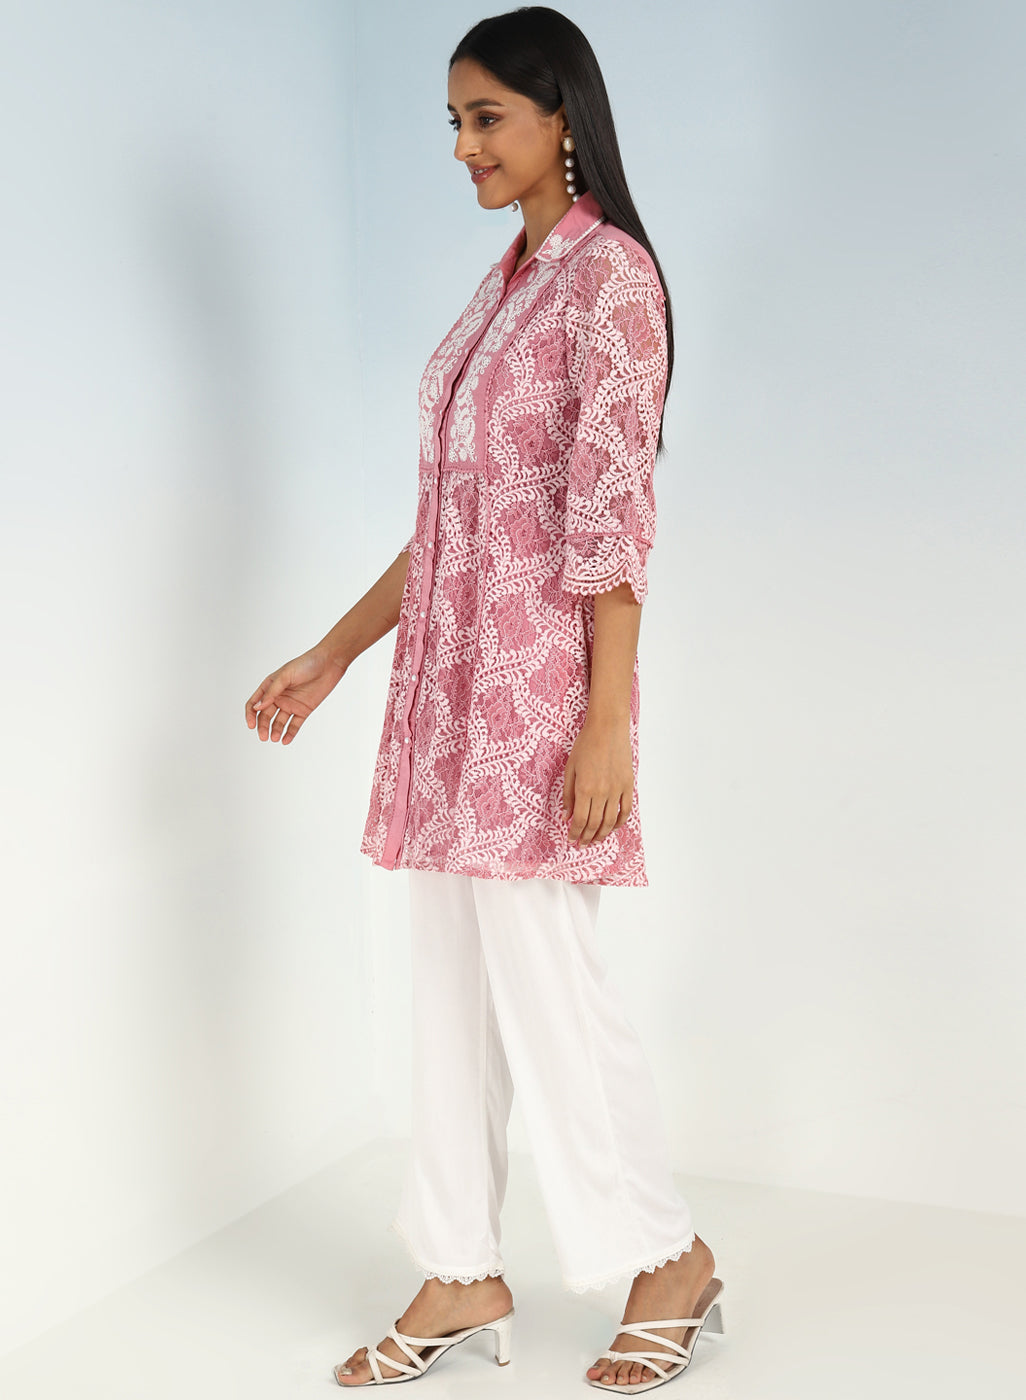 Peach Lace Collared Tunic for Women